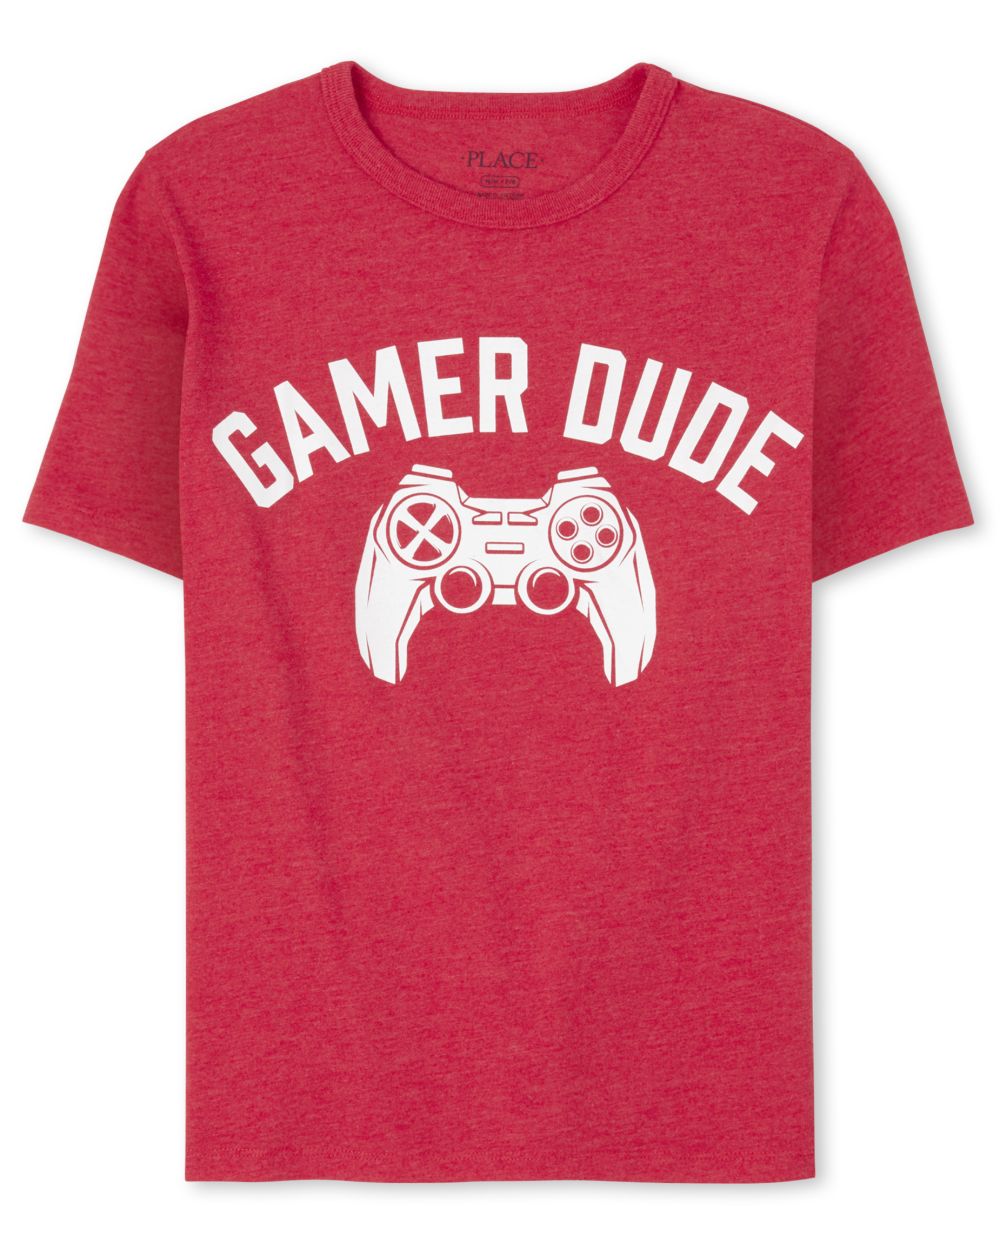 Boys Dad And Me Short Sleeve 'Gamer Dude' Video Game Matching Graphic Tee